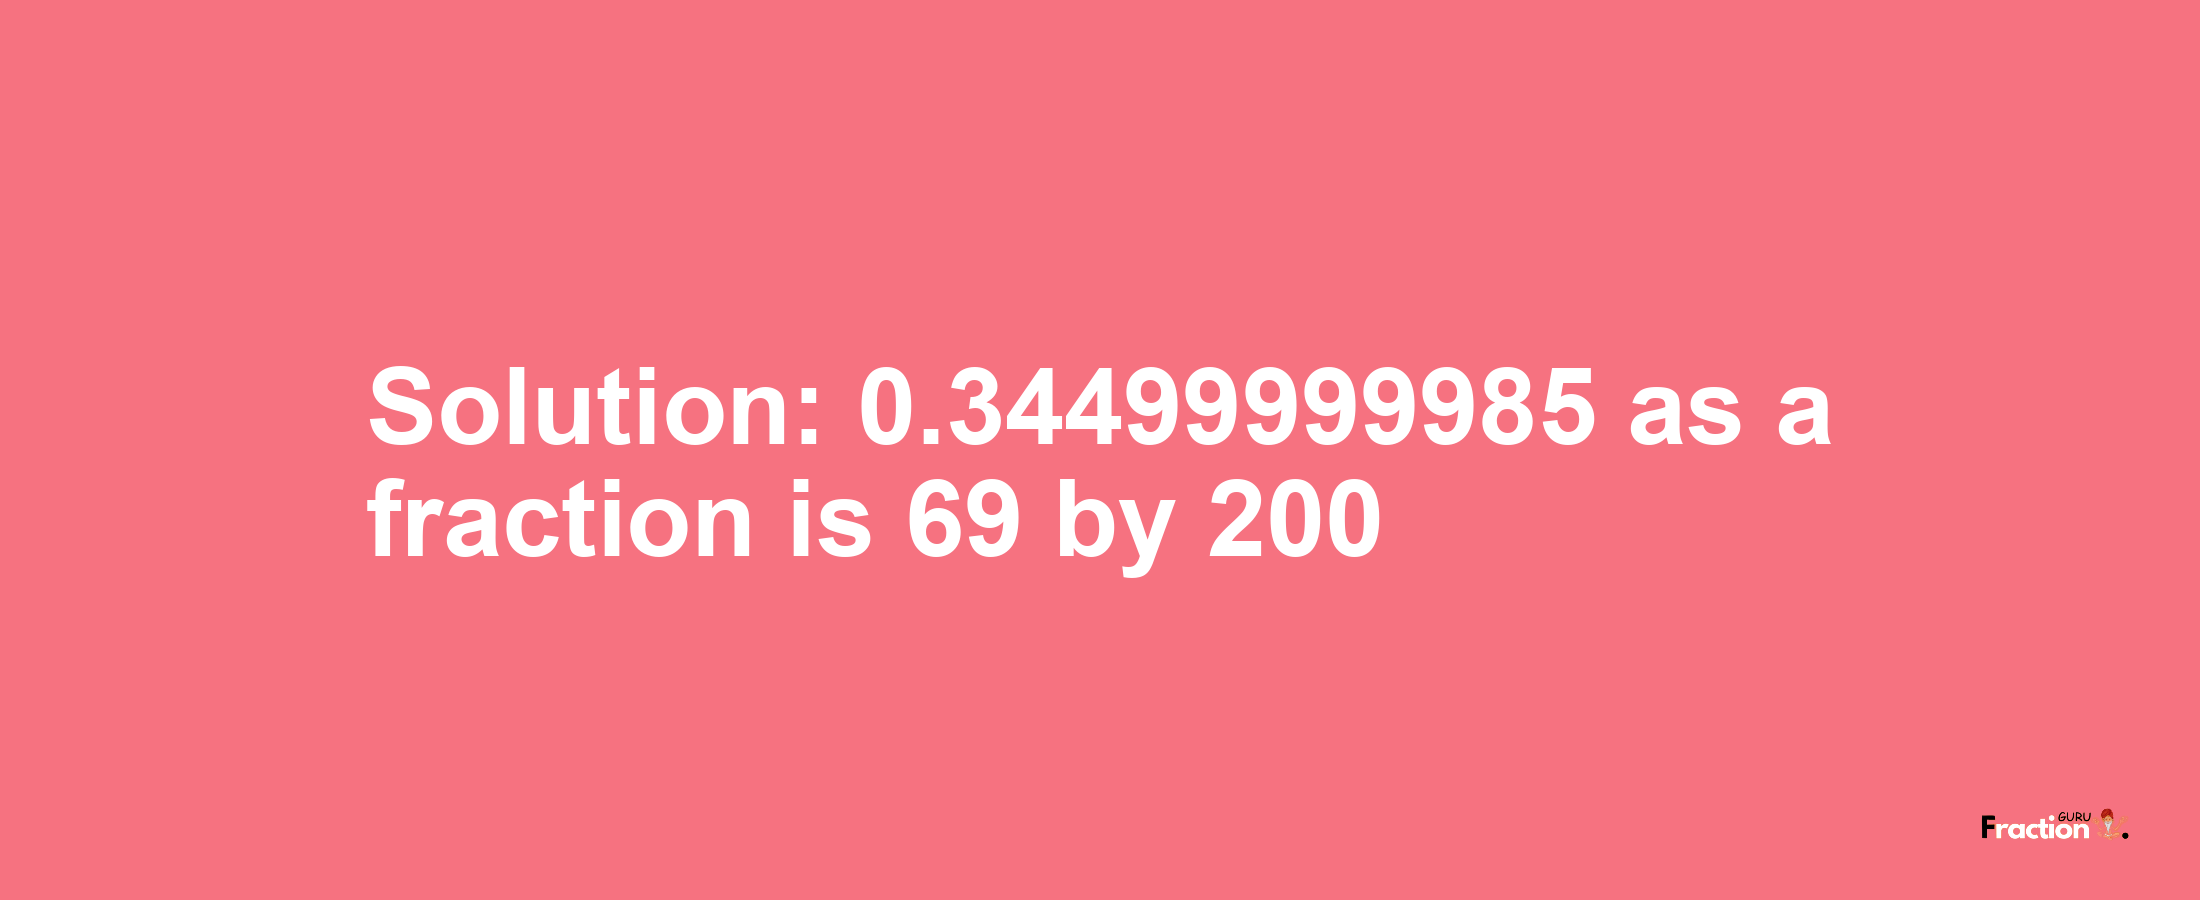 Solution:0.34499999985 as a fraction is 69/200